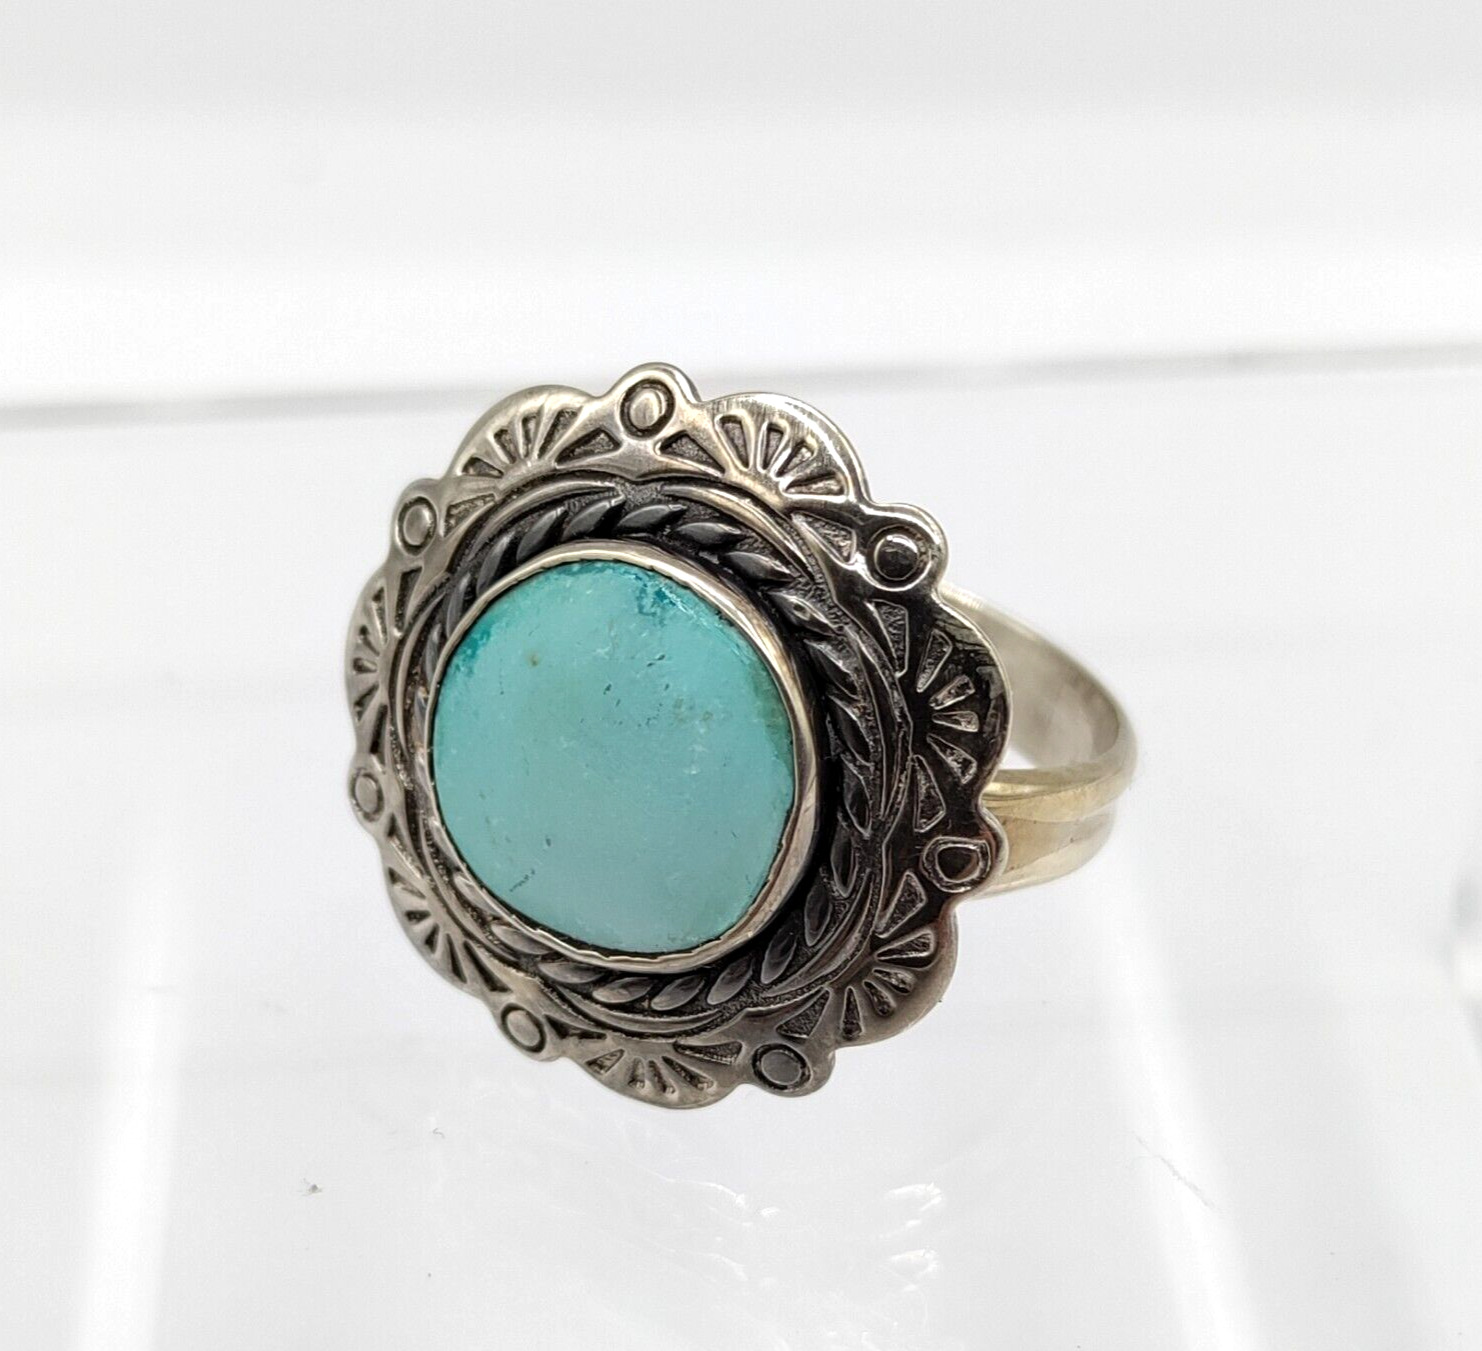 Vintage Southwestern Turquoise Hallmarked Royston Sterling Silver Ring Size 9